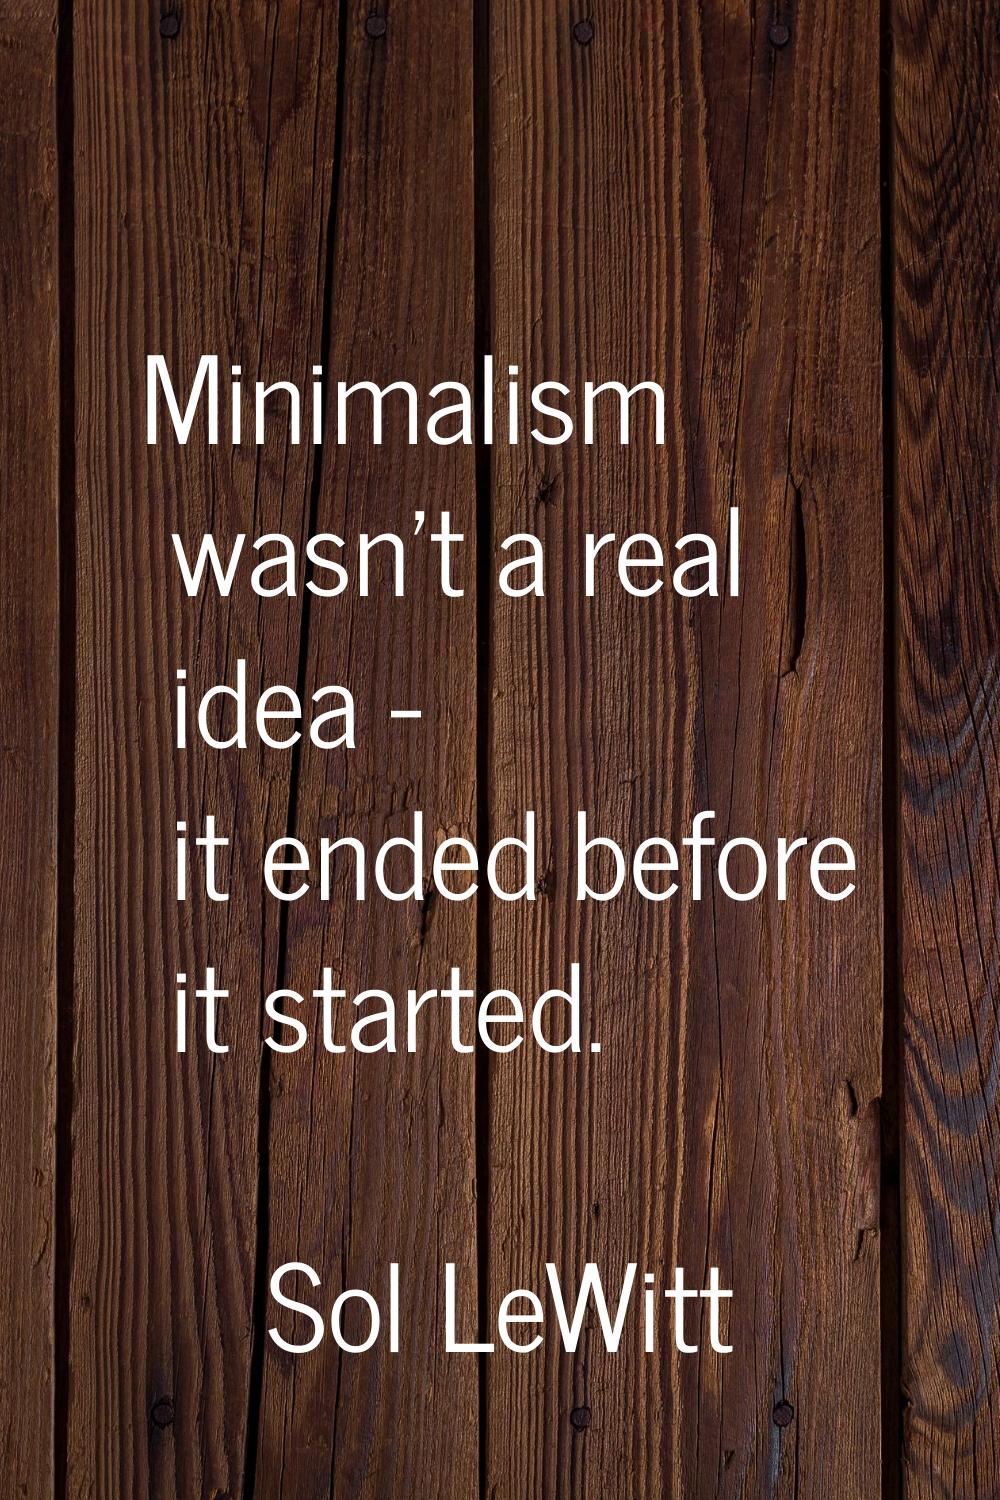 Minimalism wasn't a real idea - it ended before it started.